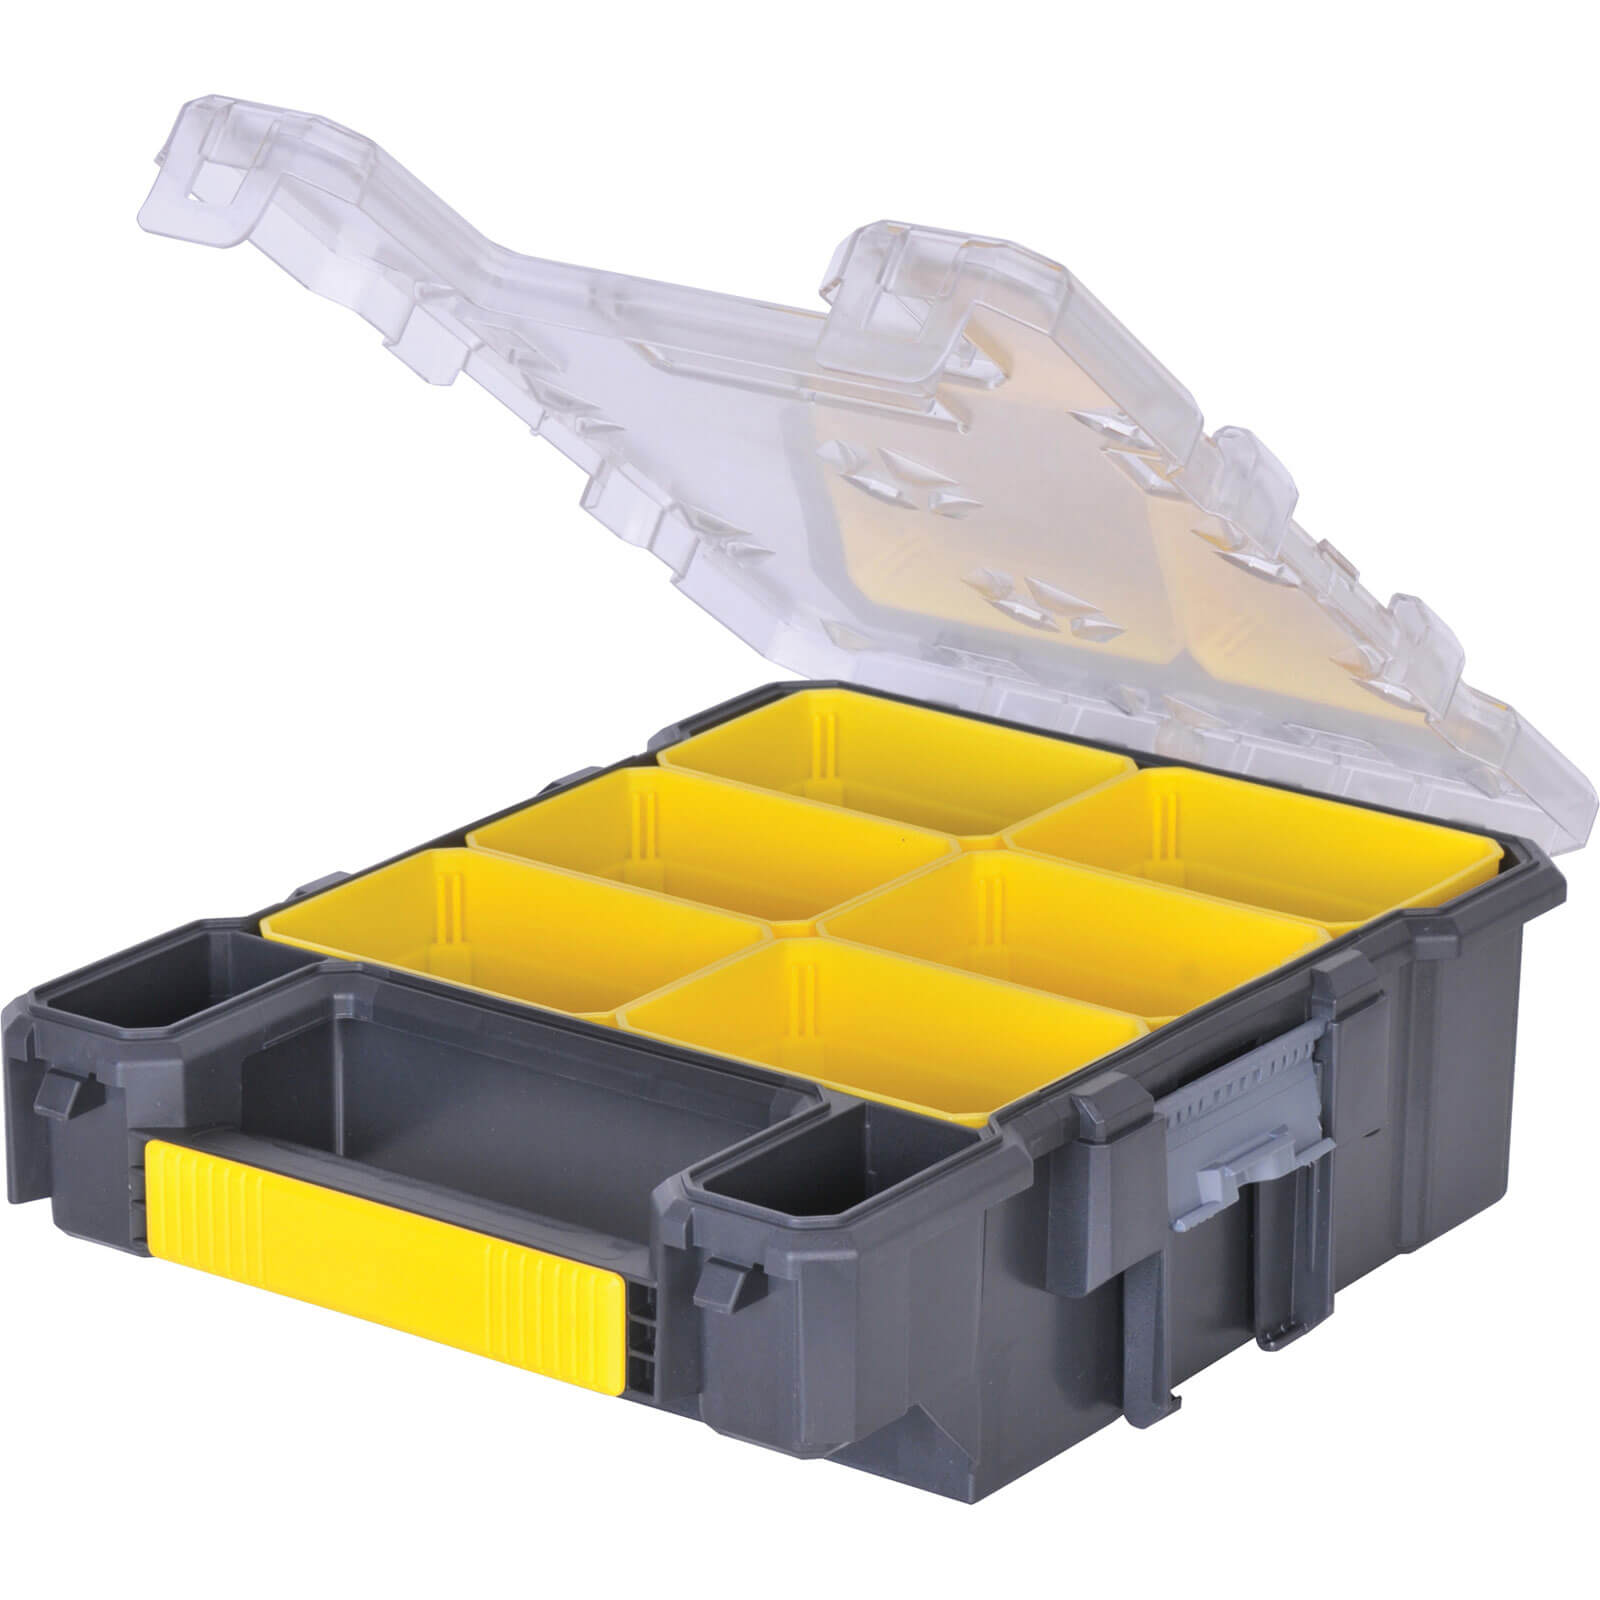 Image of Stanley FatMax Small Organiser